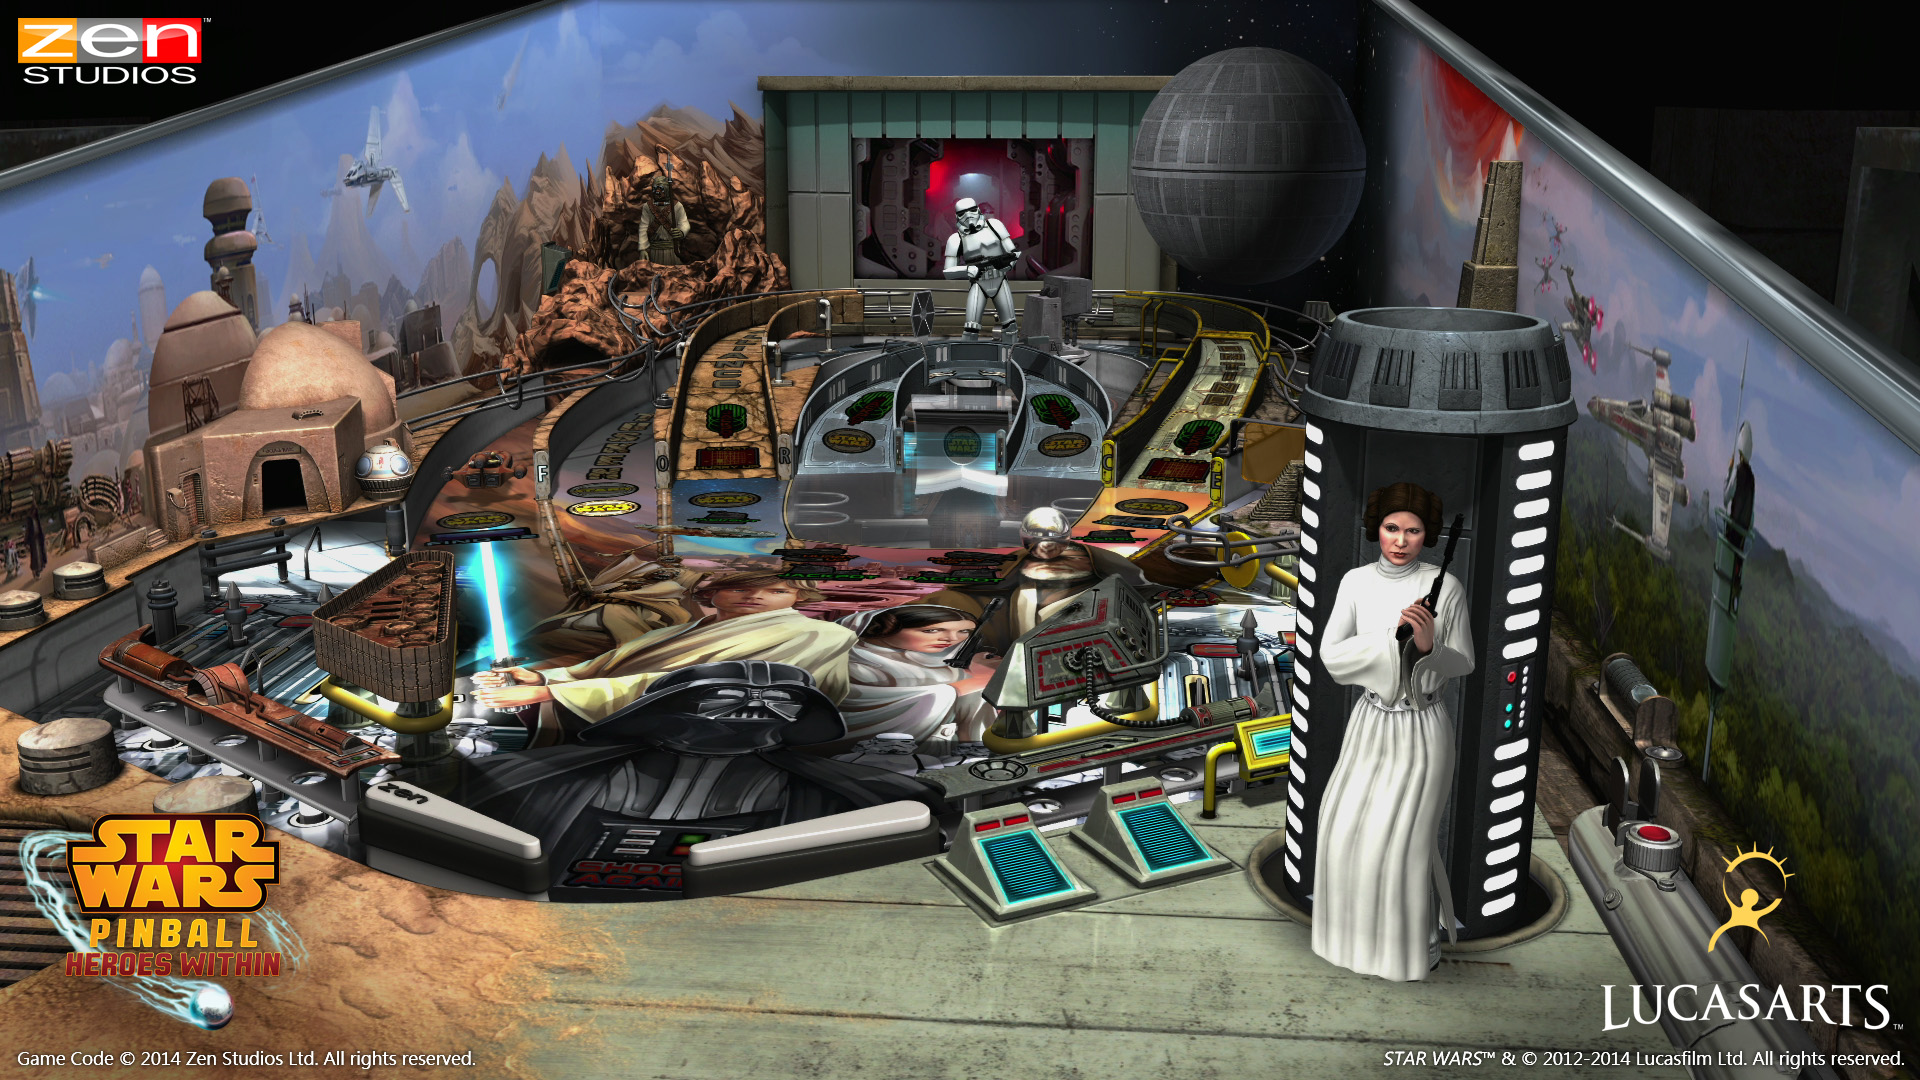 New trailer for Star Wars Pinball: Heroes Within